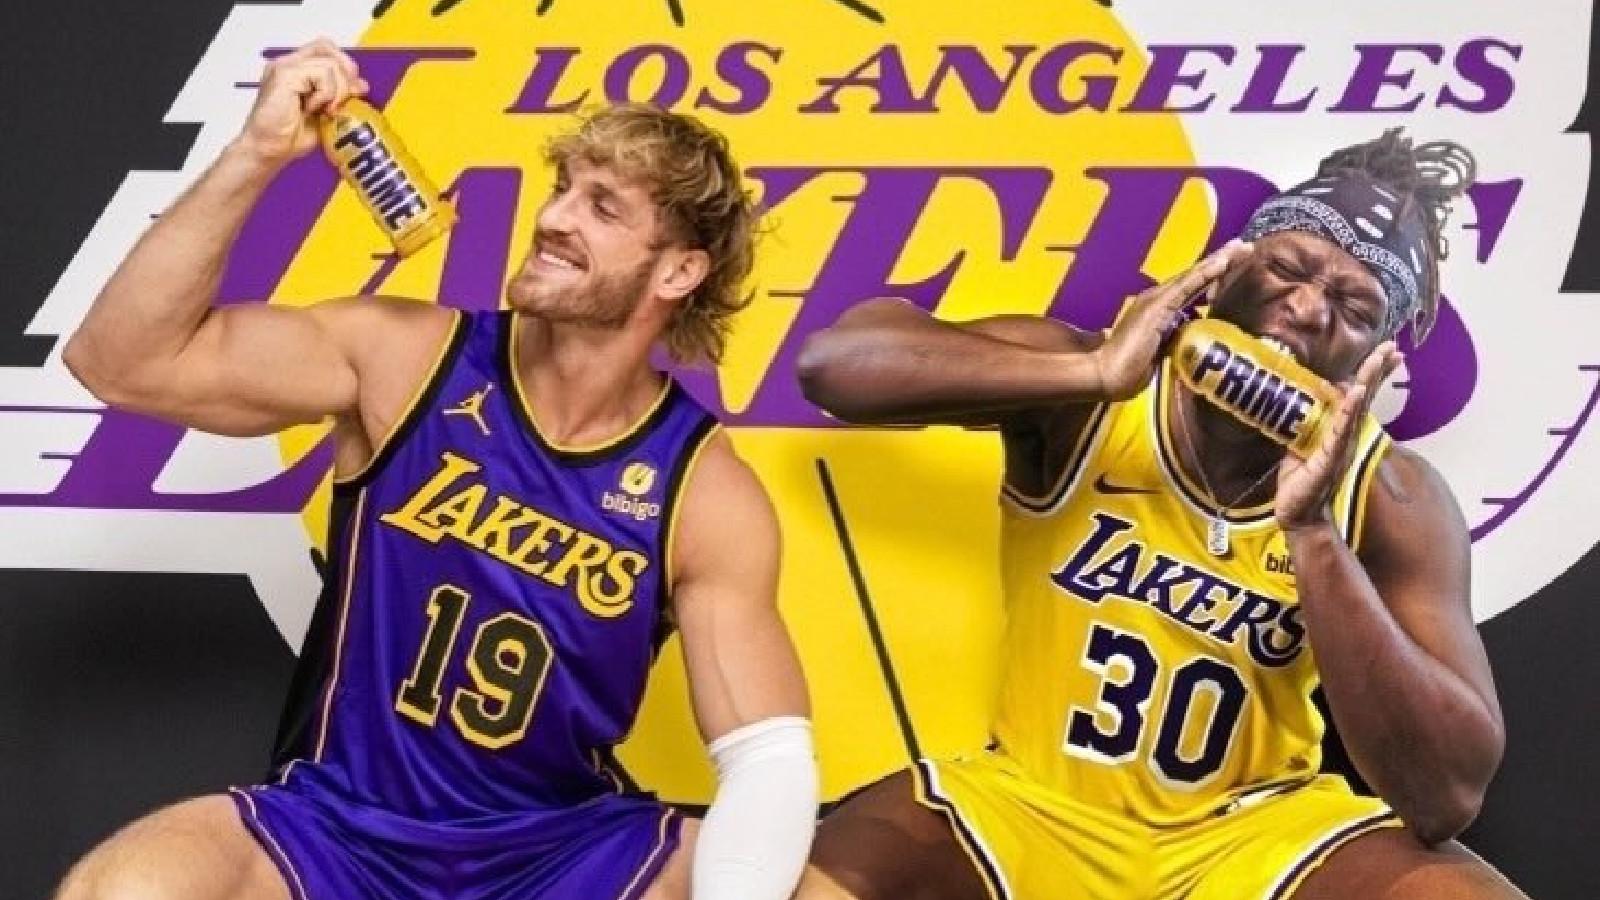 Logan Paul and KSI holding Prime bottle in front of LA Lakers sign